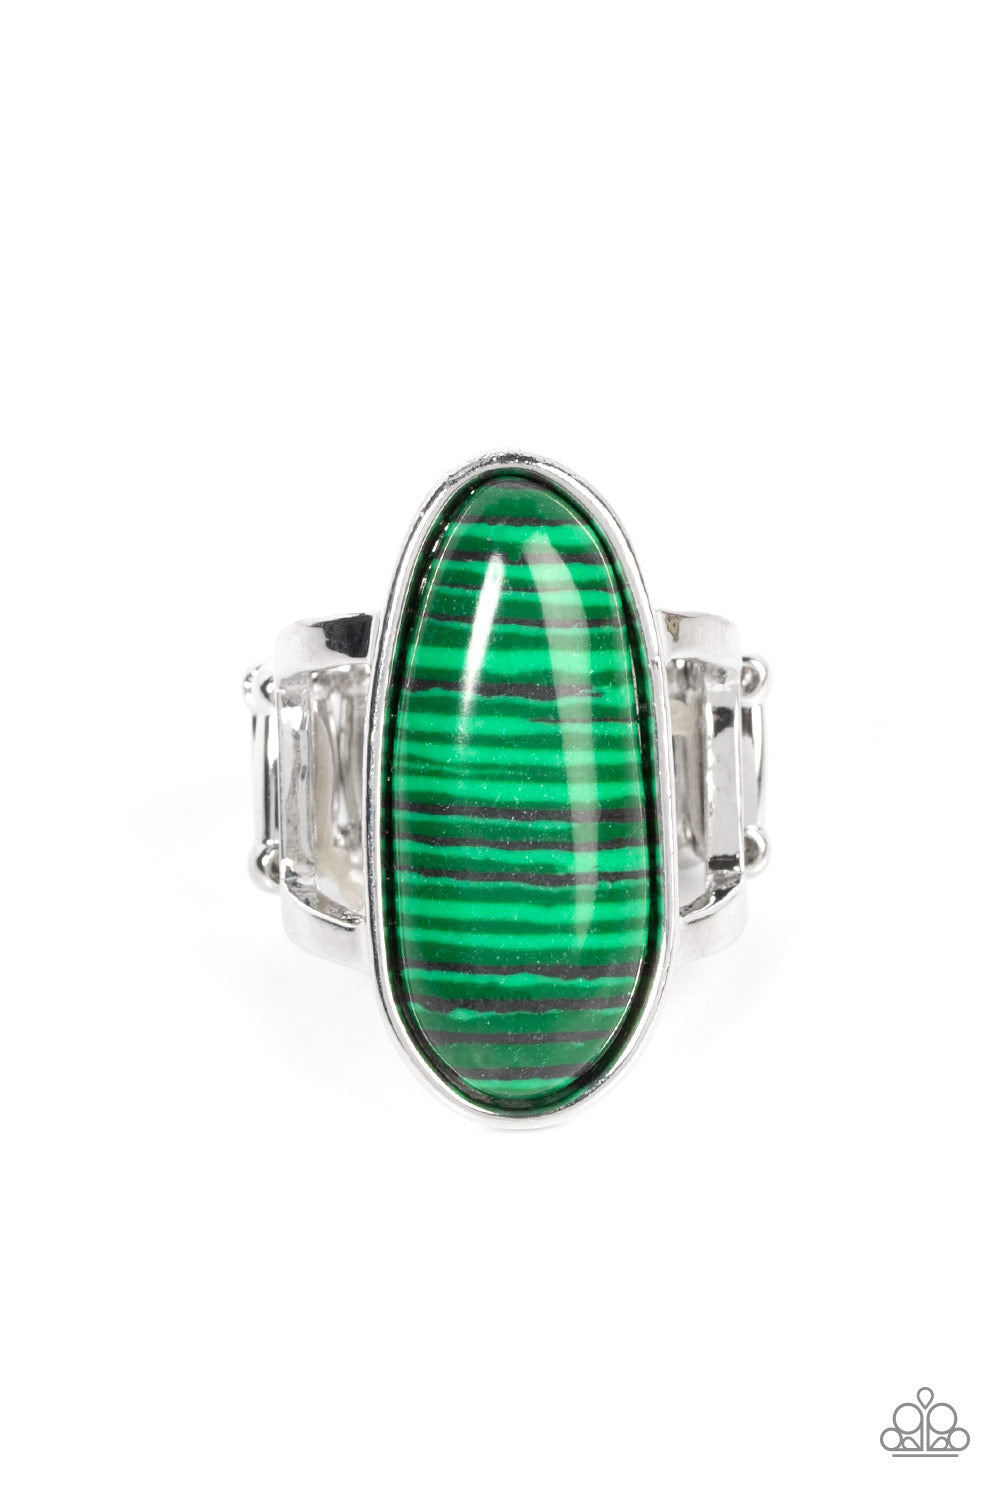 Paparazzi Accessories Eco Expression - Green Painted in a faux stone finish, an oblong green bead is pressed into a sleek silver fitting atop layered silver bands for an artisanal finish. Features a stretchy band for a flexible fit. Sold as one individual